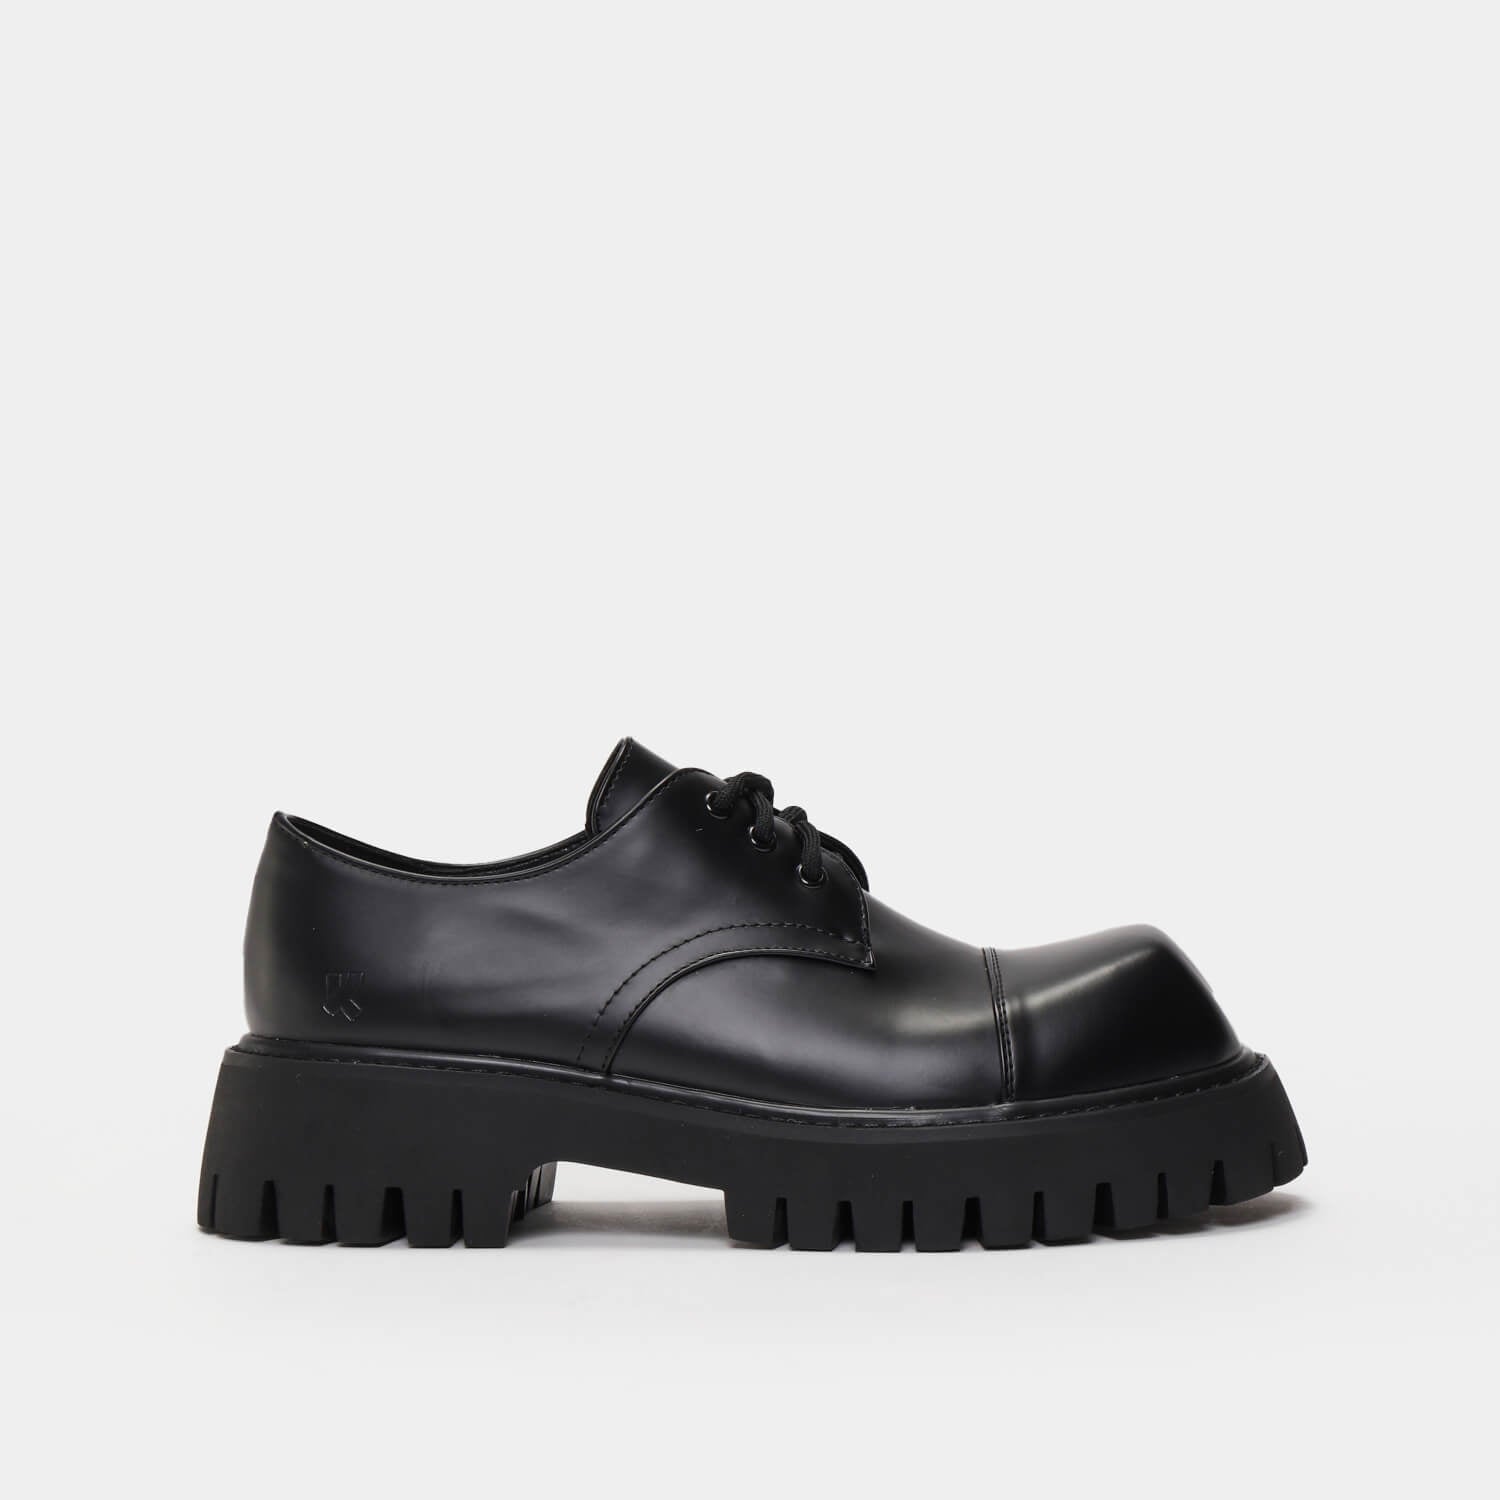 The Corrupter Men's Square Toe Shoes - Shoes - KOI Footwear - Black - Side View